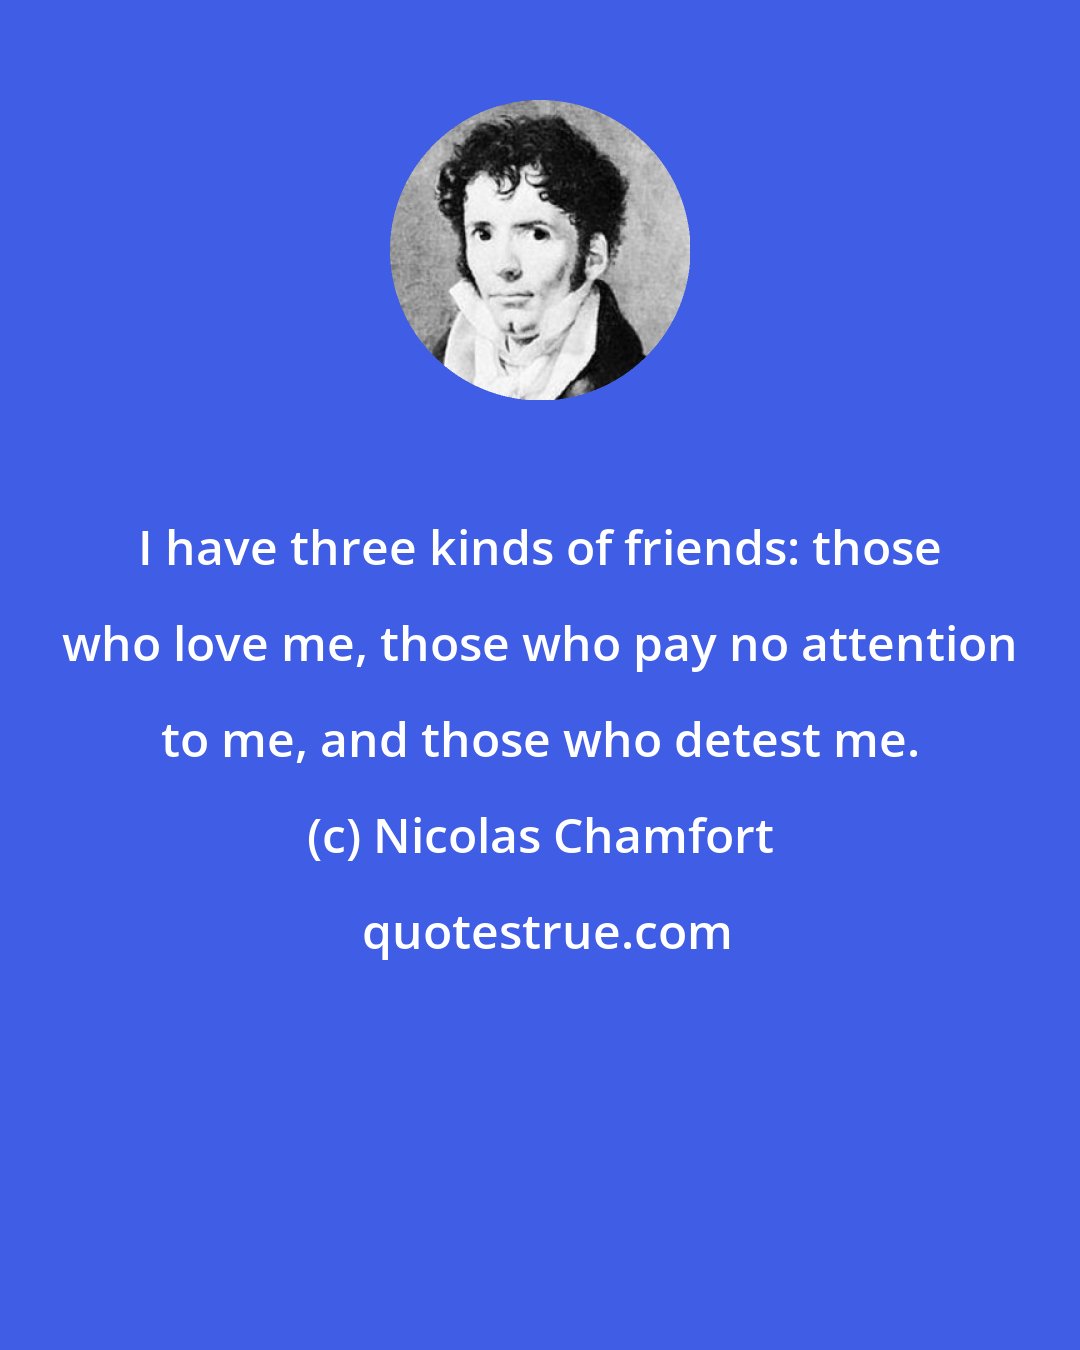 Nicolas Chamfort: I have three kinds of friends: those who love me, those who pay no attention to me, and those who detest me.